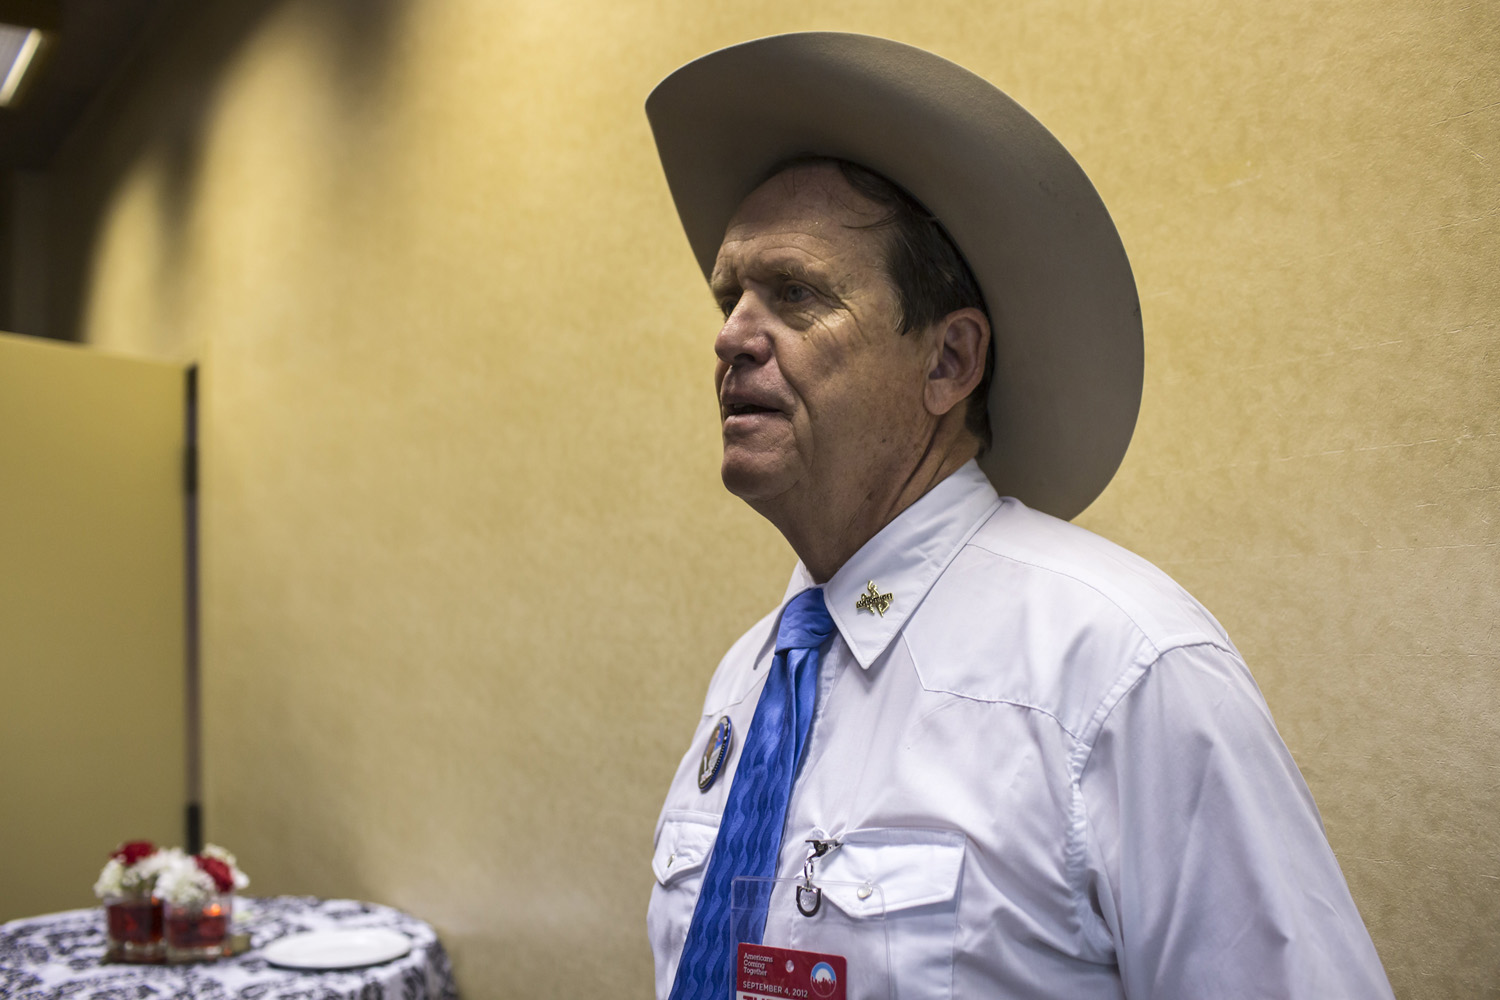 Image: Pete Laybourn, a Mormon delegate from Cheyenne, Wyo., attends an LDS Caucus meeting during the Democratic National Convention in Charlotte, N.C. Sept. 4, 2012.